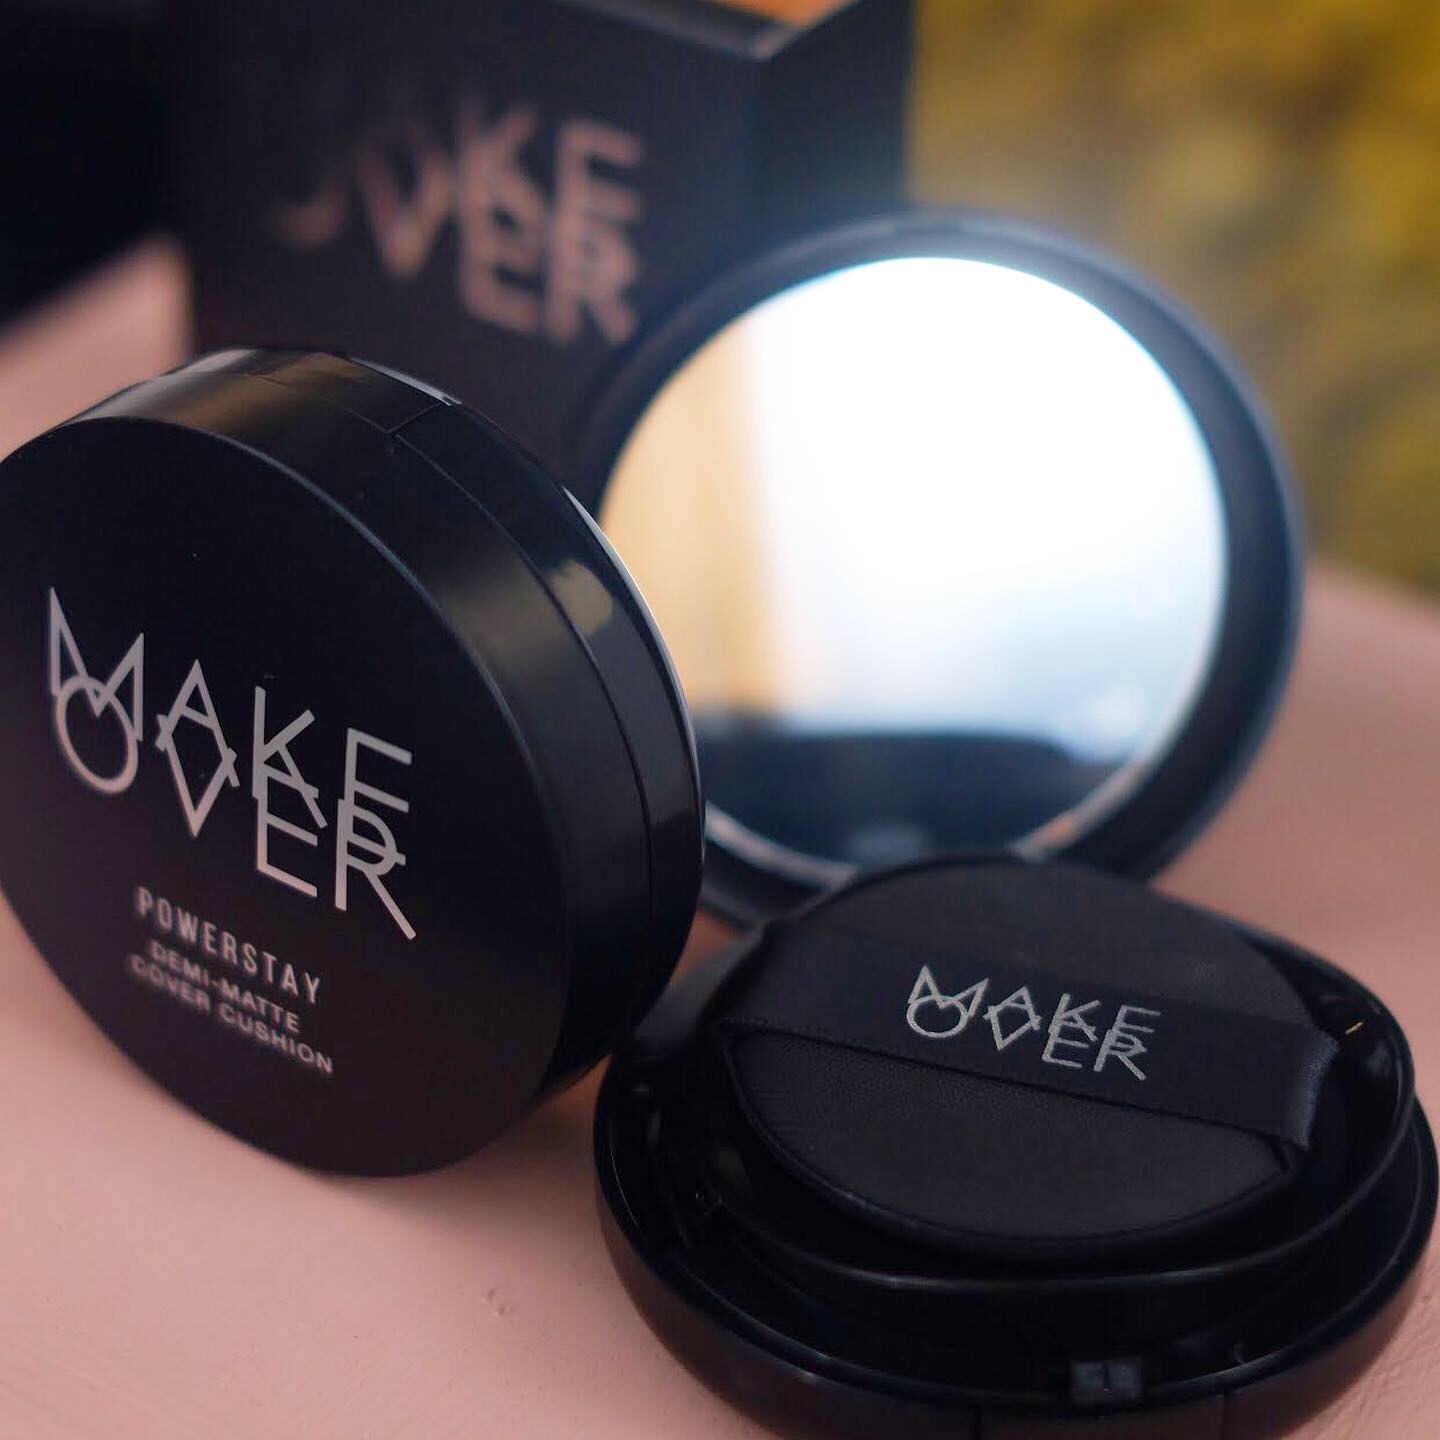 Make Over Powerstay Demi-Matte Cover Cushion | Yay Or Nay???